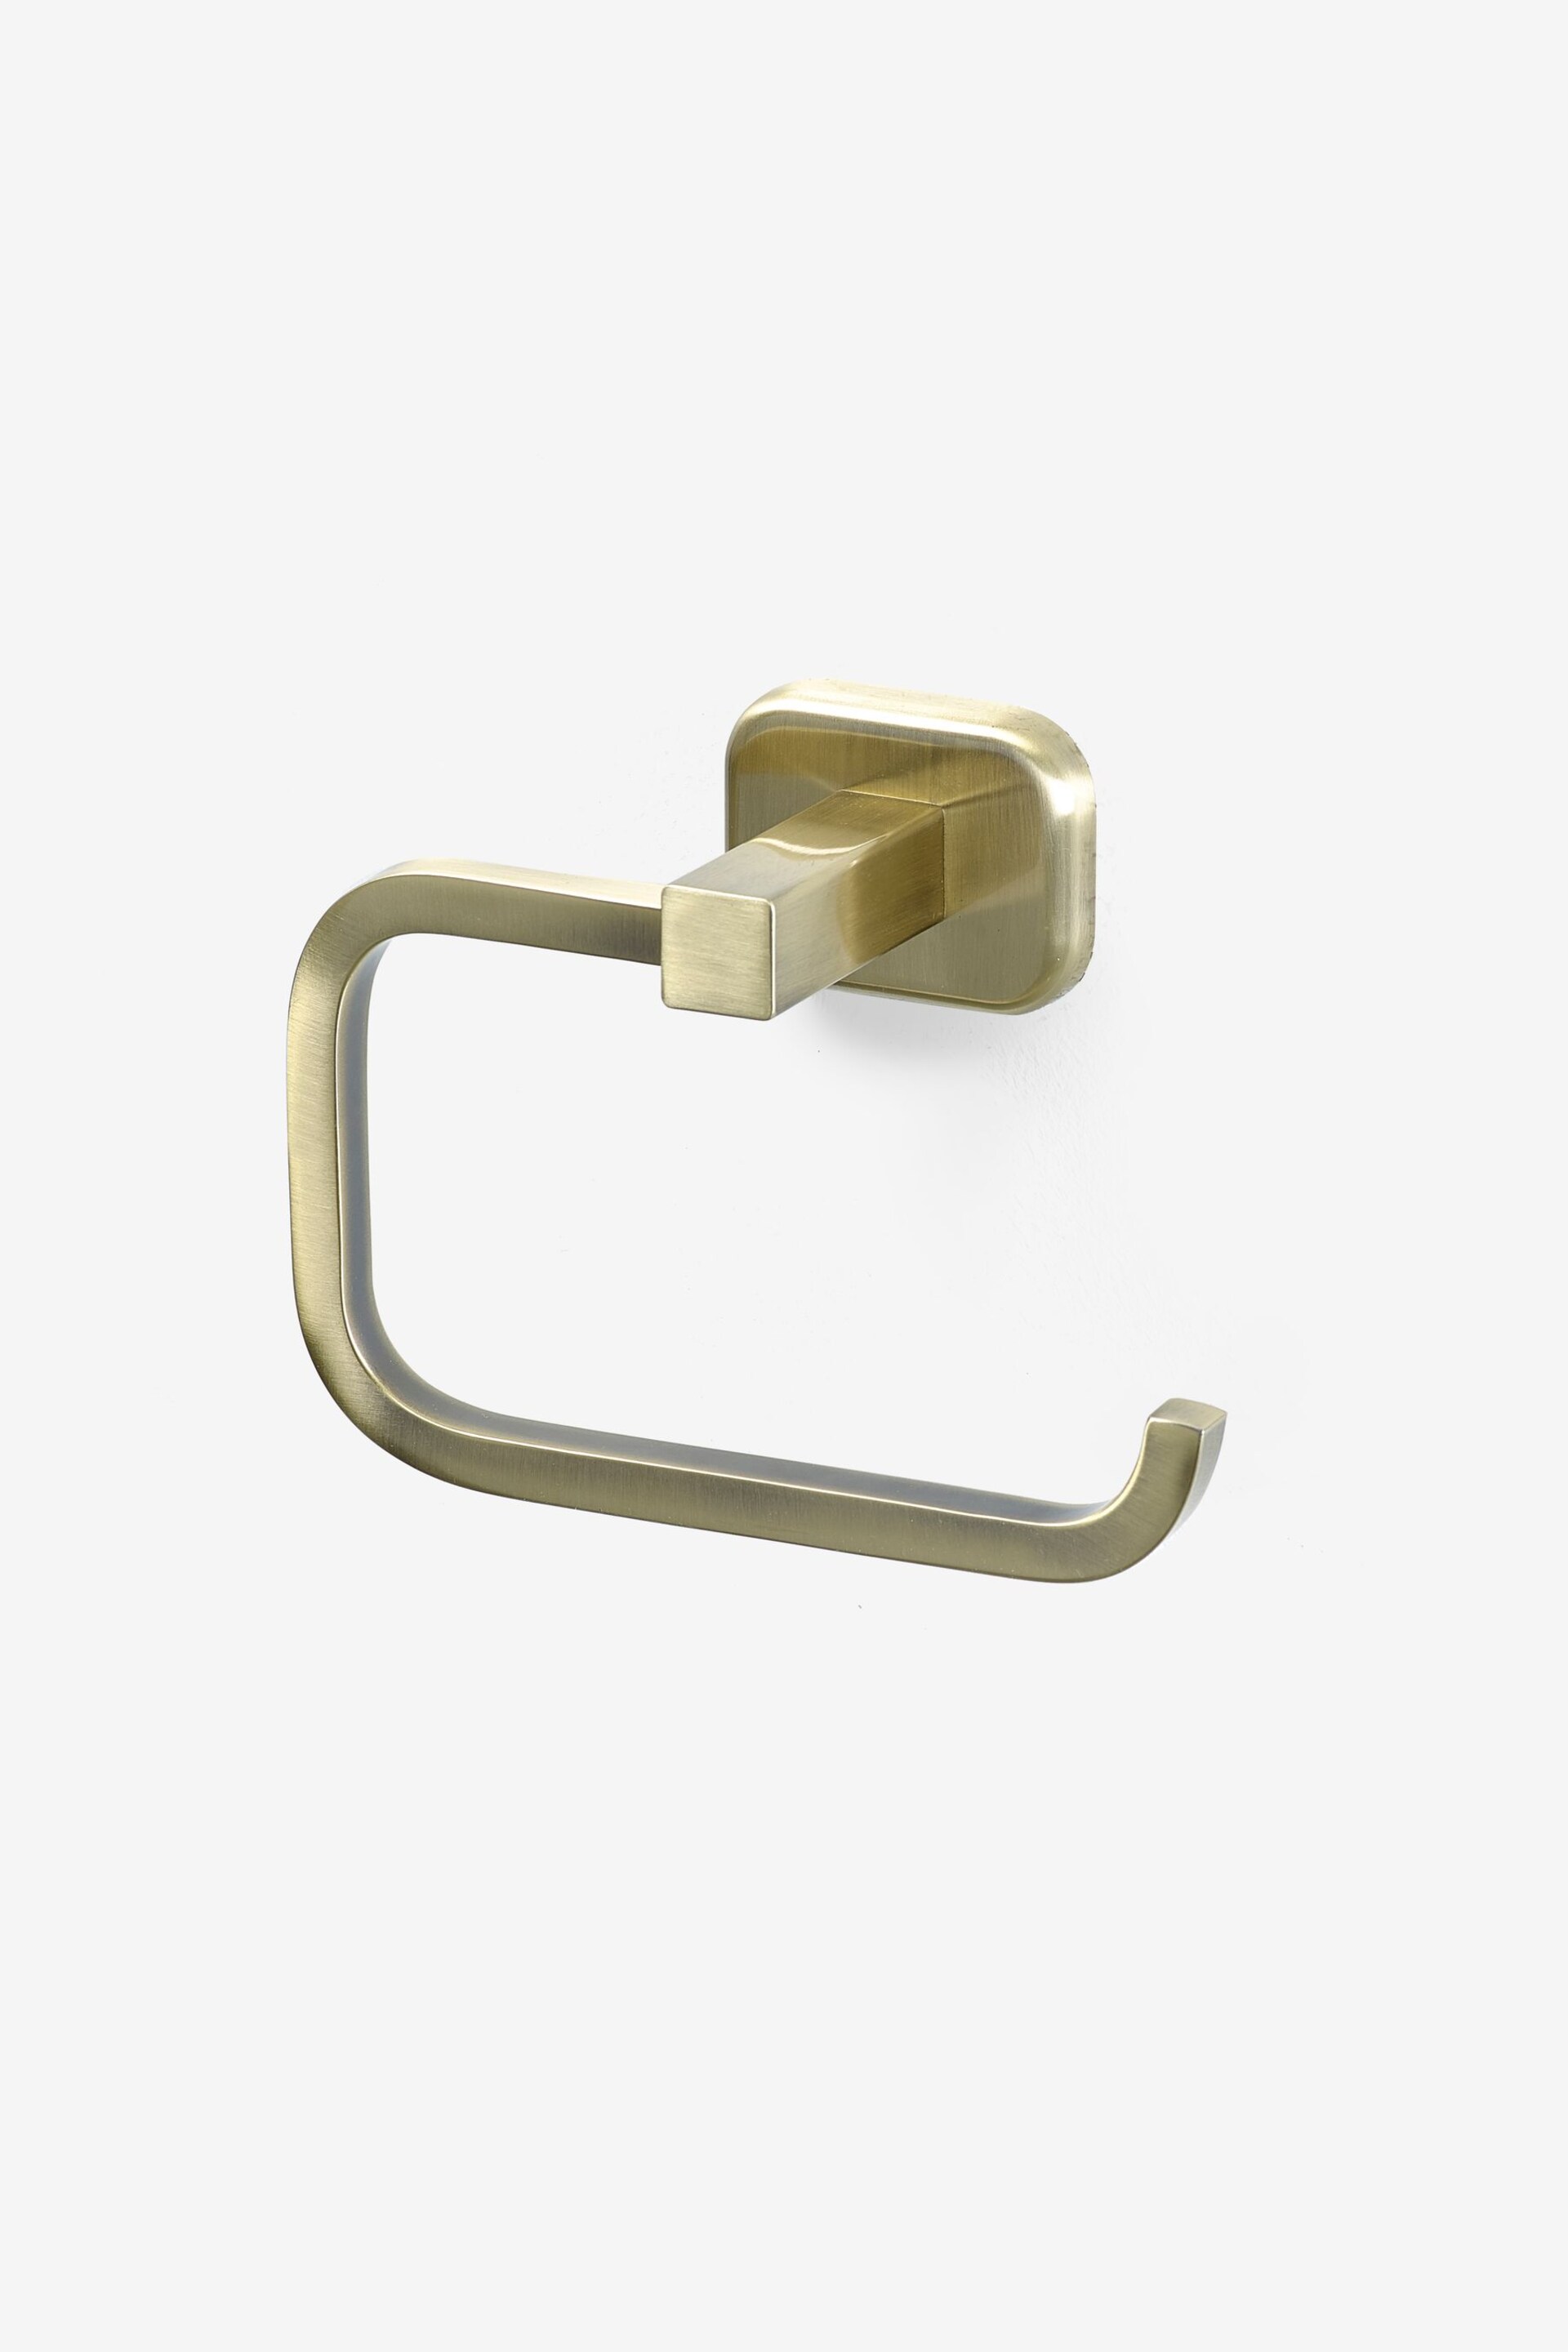 Gold Toilet Roll Holder - Image 5 of 6